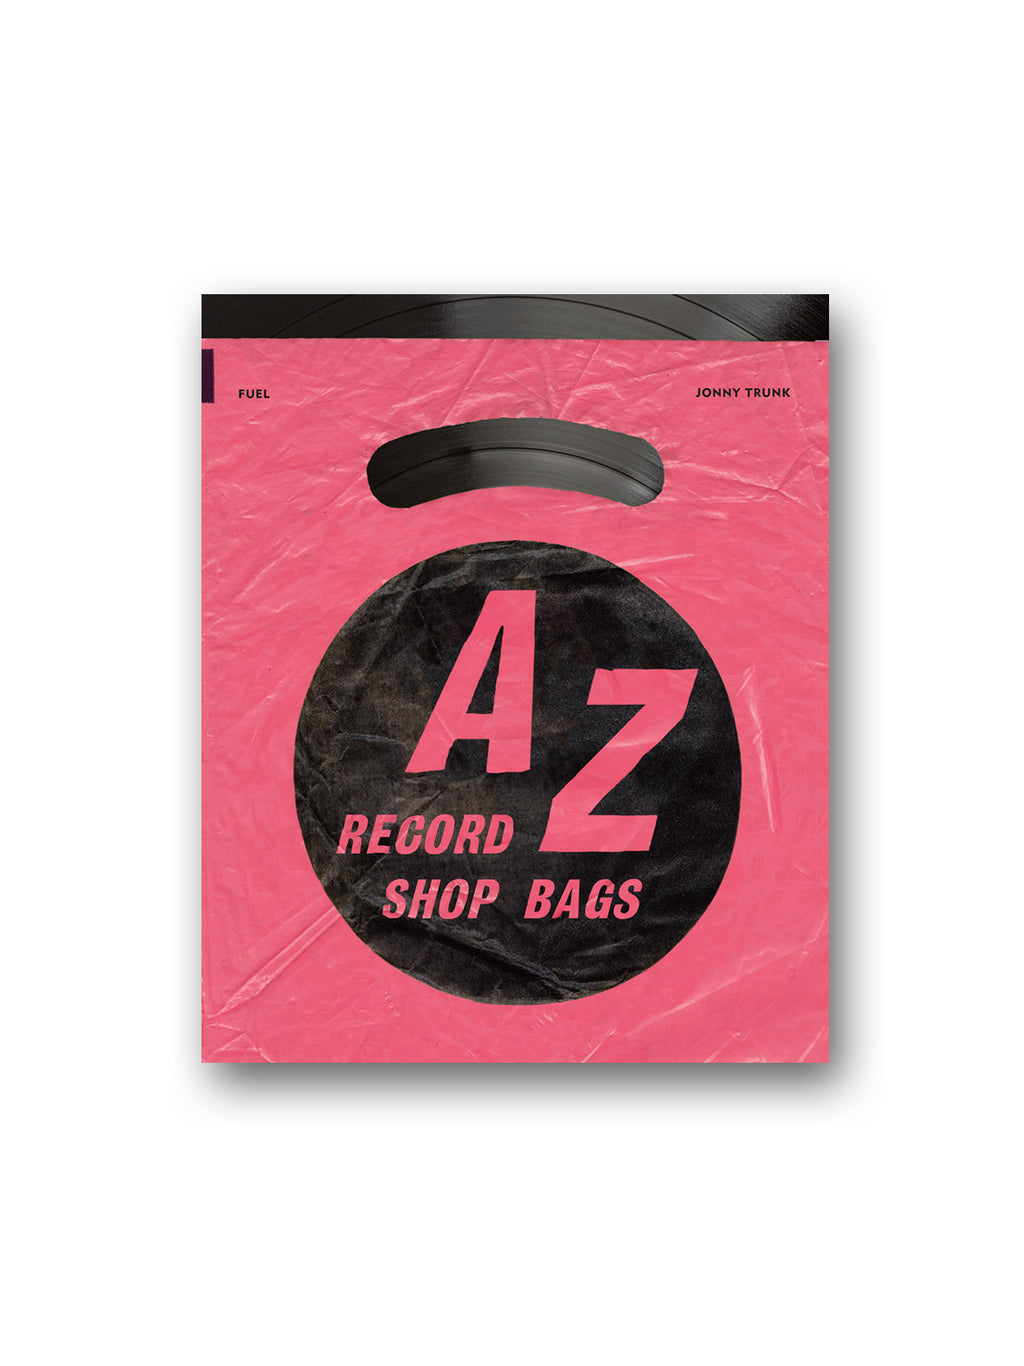 A-Z of Record Shop Bags: 1940s to 1990s